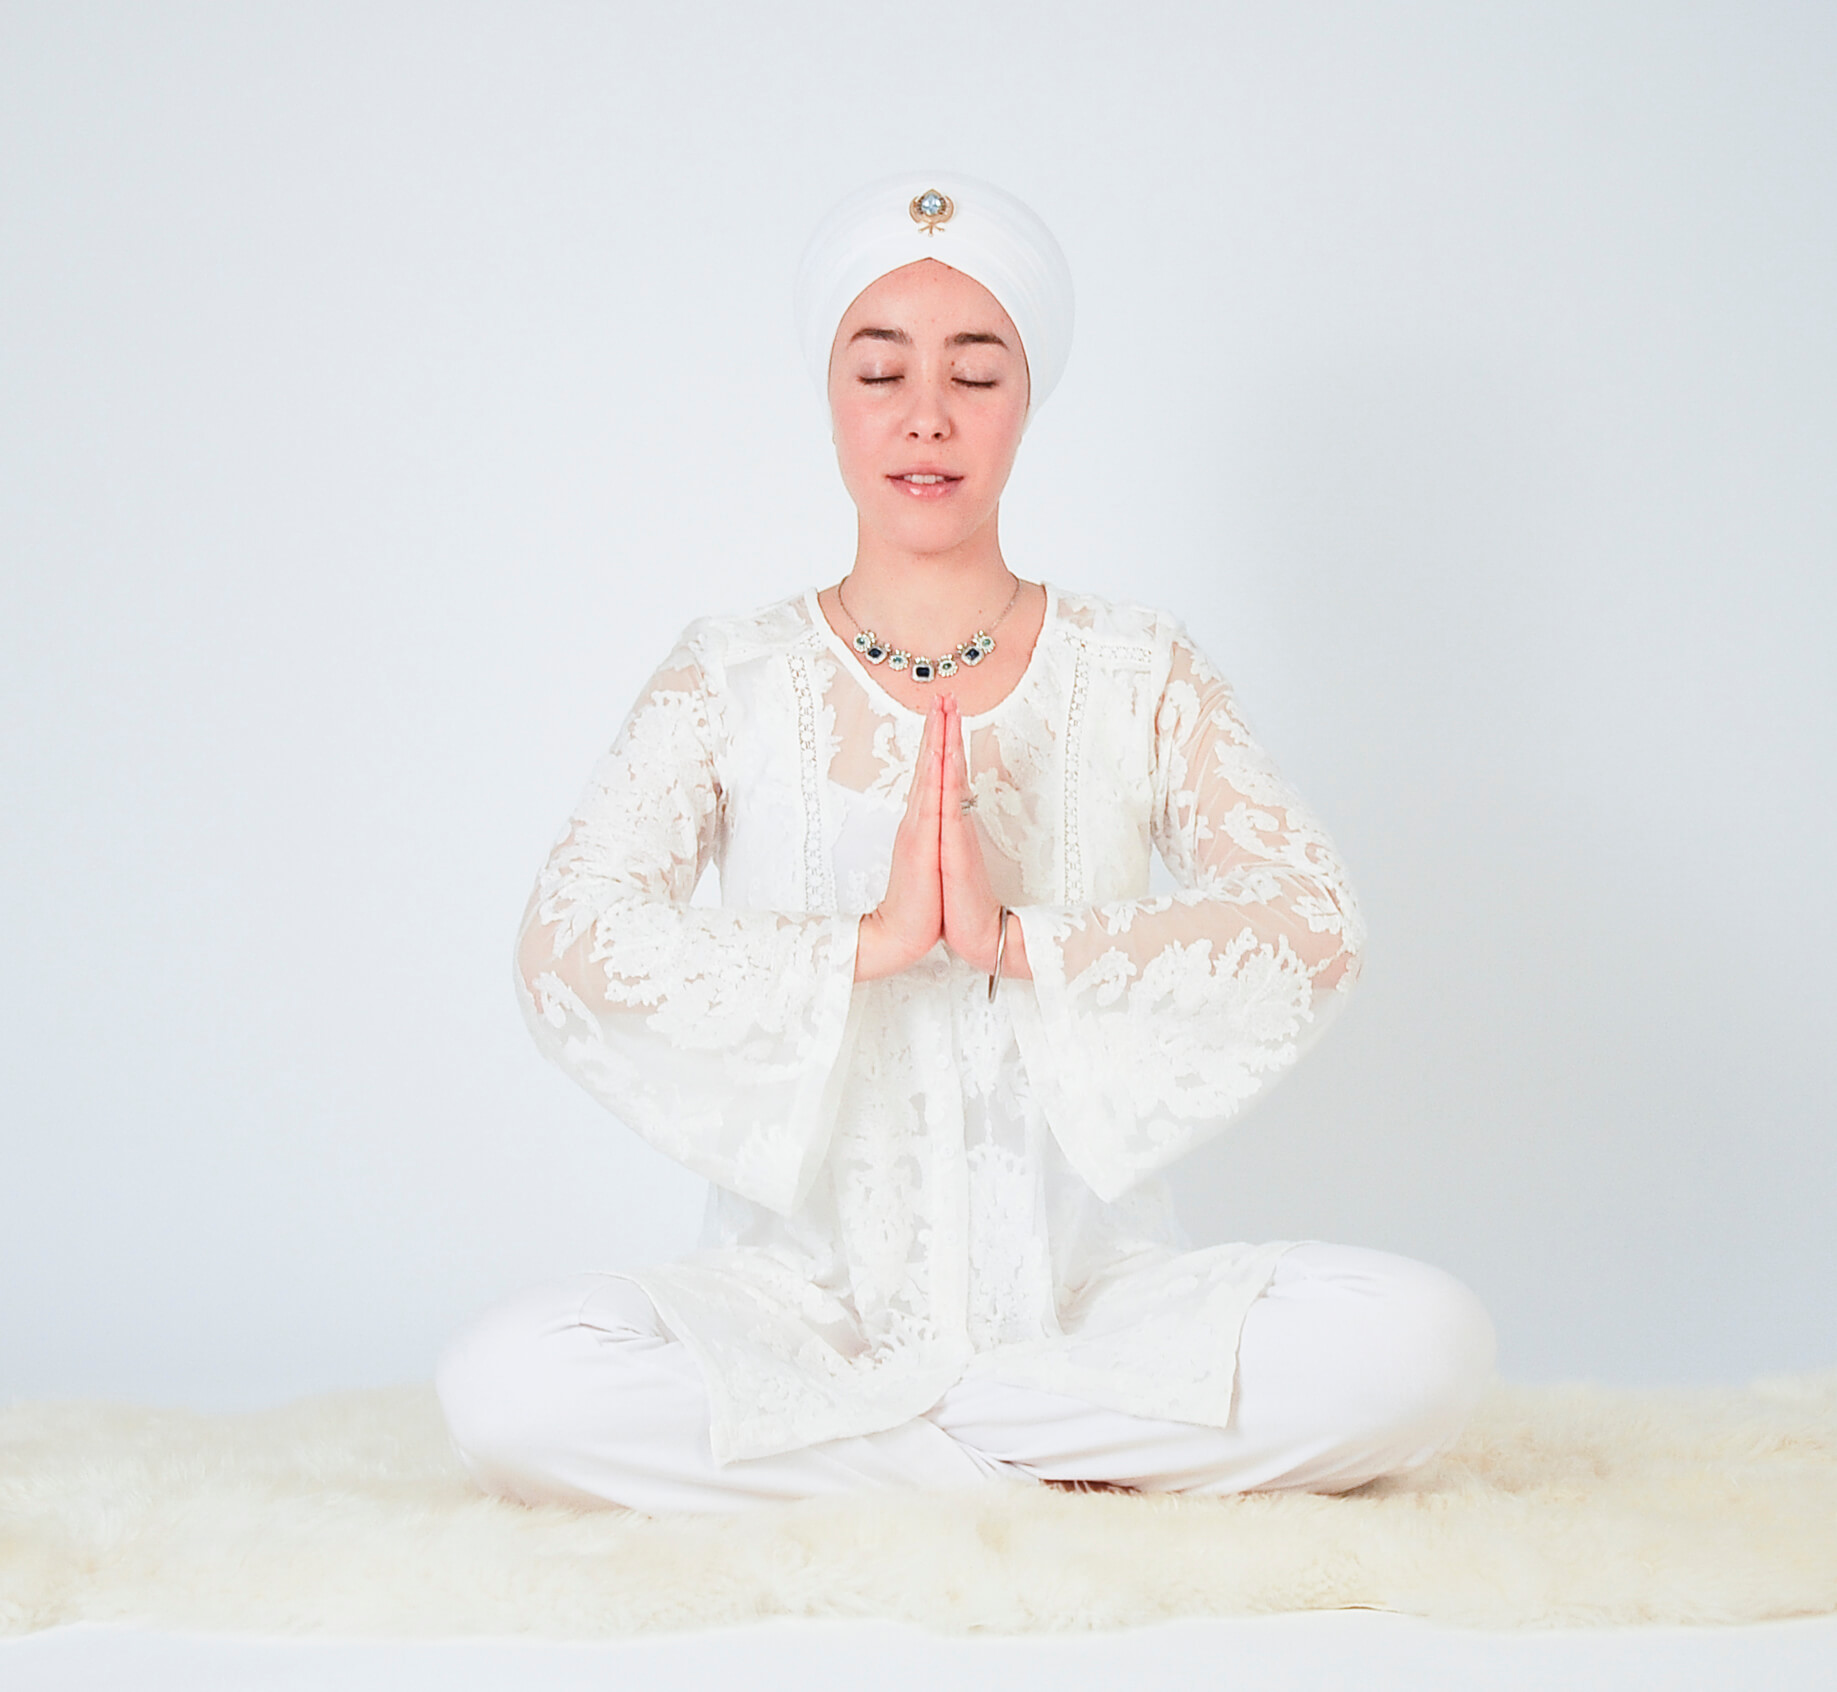 Meditation to Open the Heart